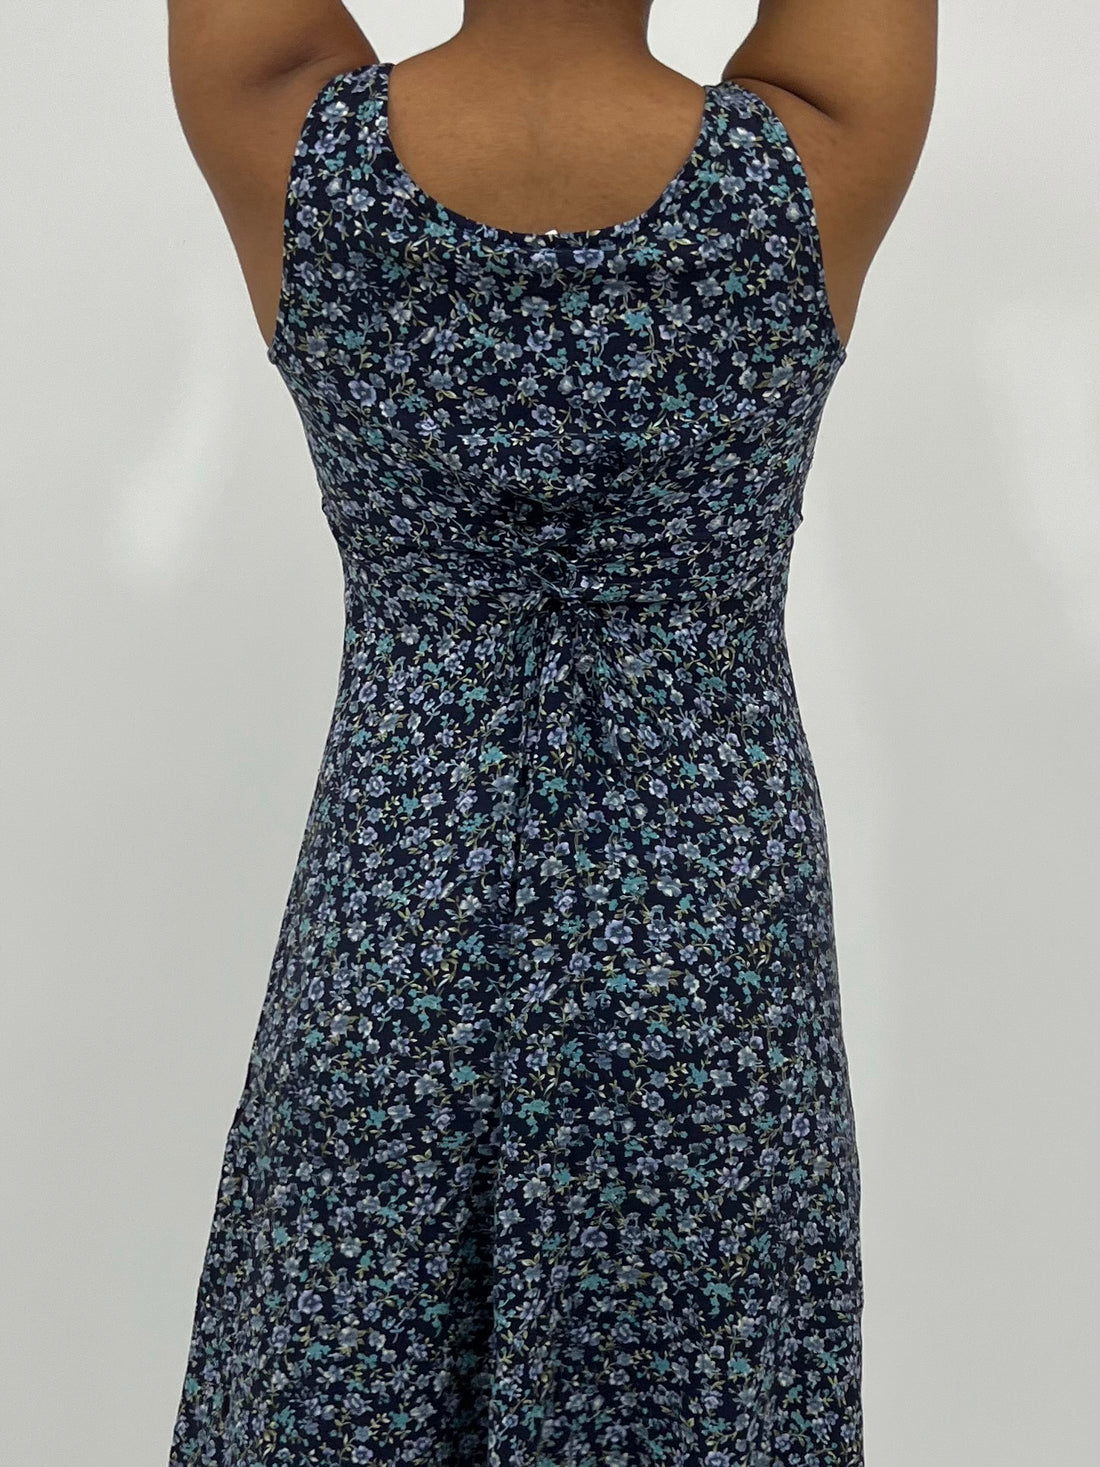 Floral Maxi Dress with Back Ties (M)